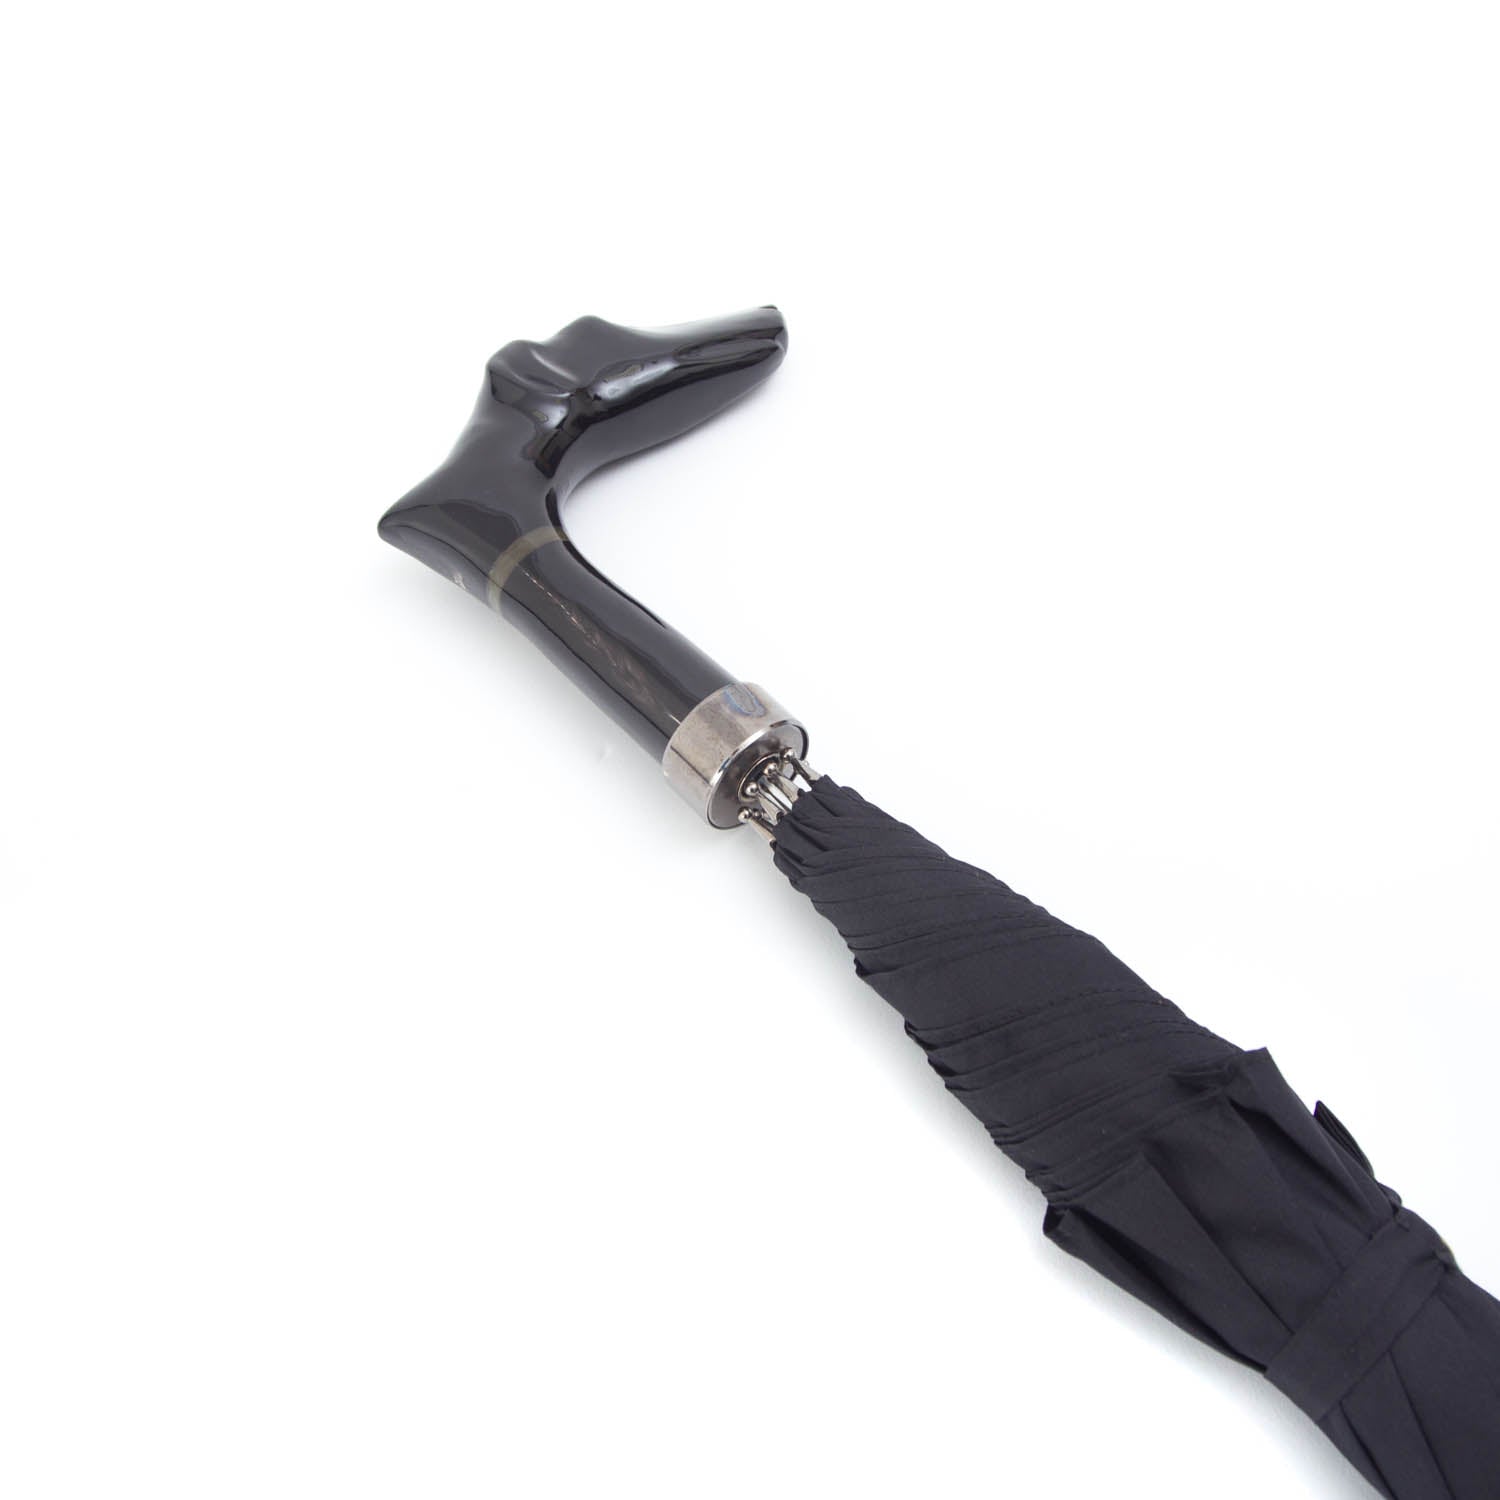 A Mario Talarico Black Canopy Umbrella with Dog Horn Handle on a white background from KirbyAllison.com.